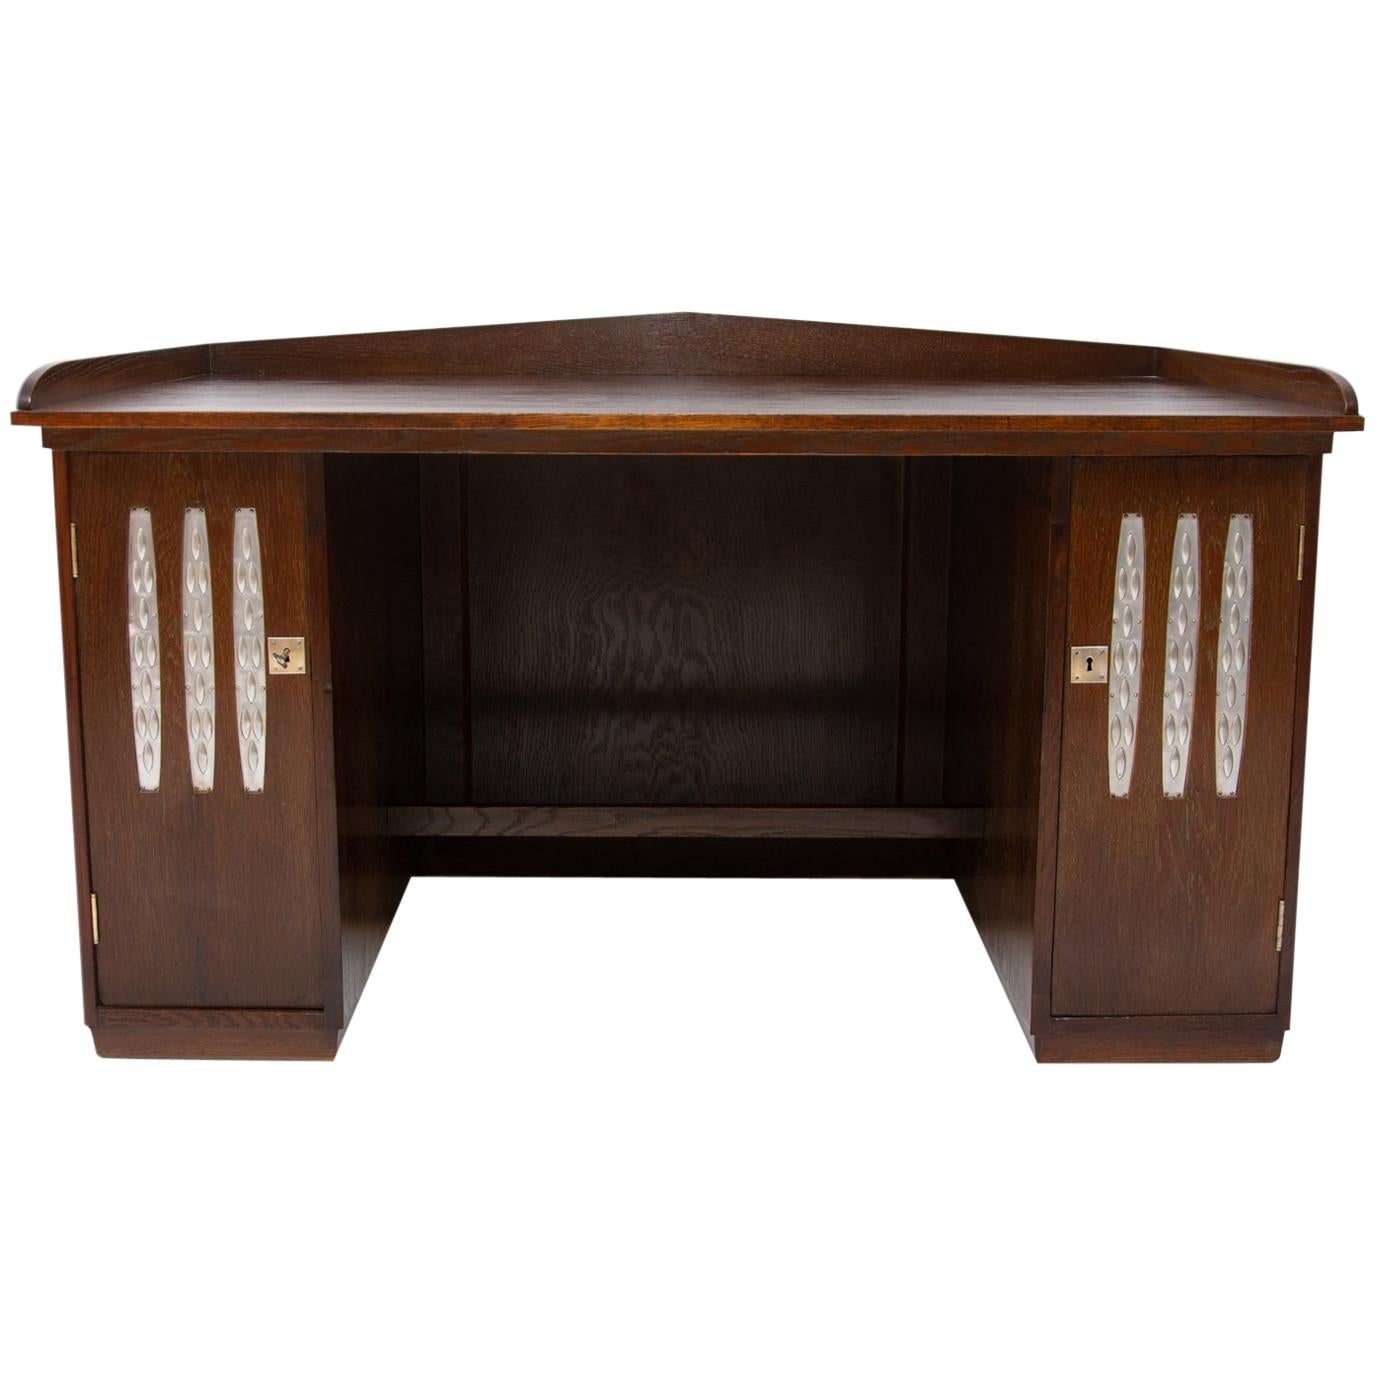 Early 20th Century Viennese Secession Writing Desk in Oak